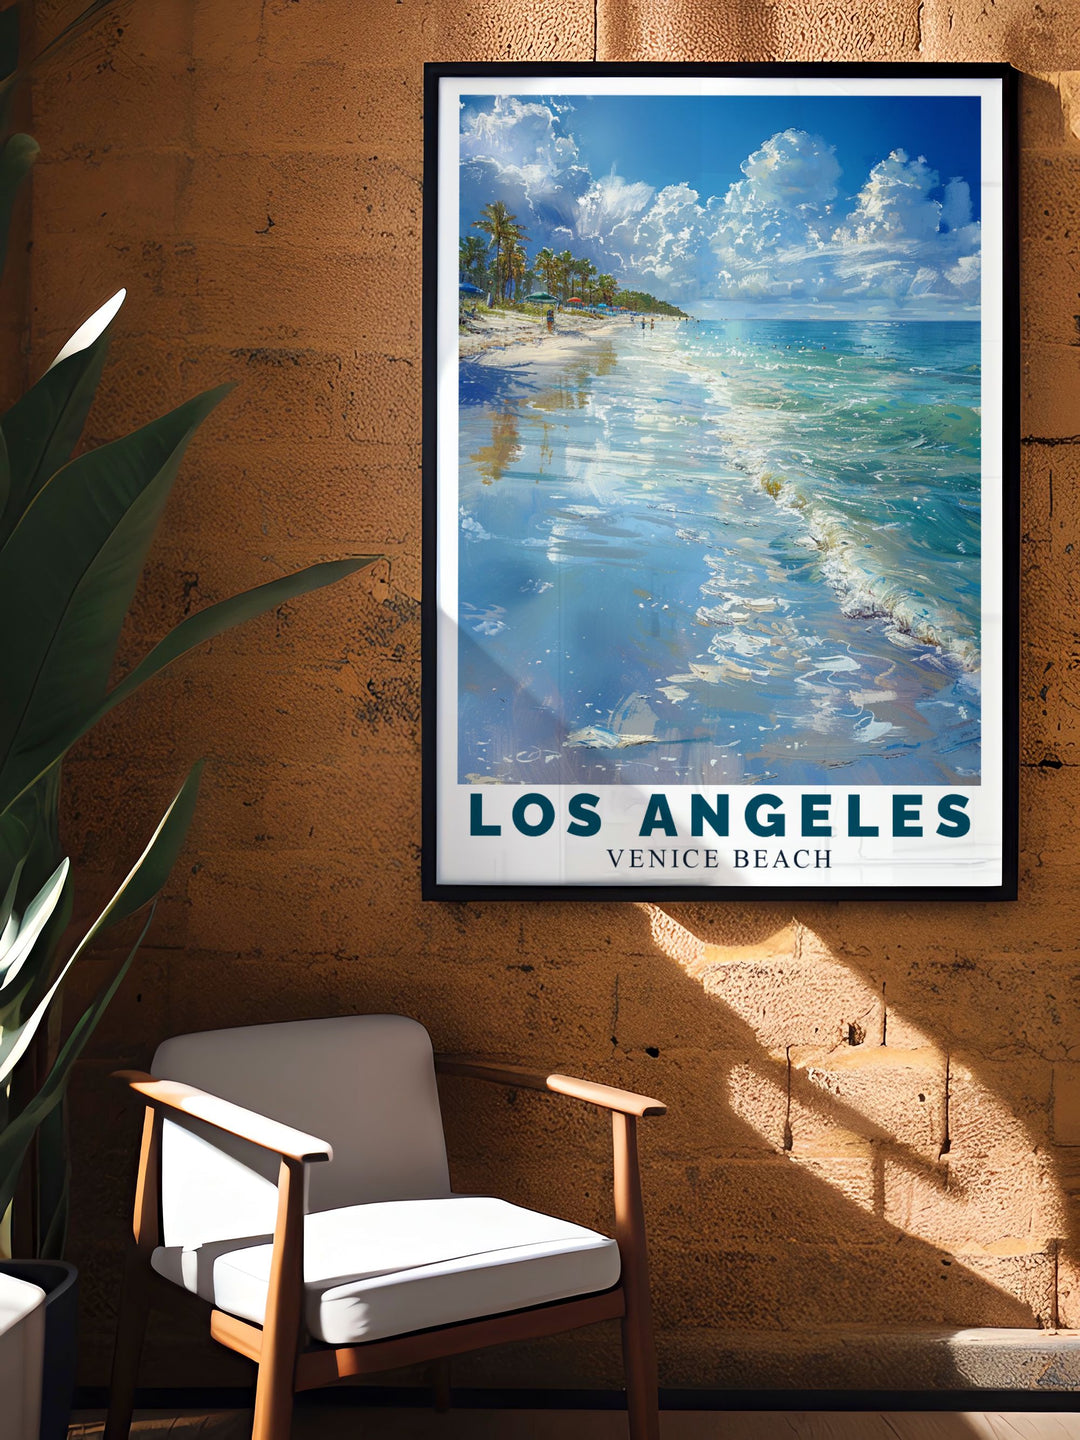 This detailed poster of Los Angeles illustrates the citys diverse neighborhoods and famous cultural landmarks, making it an excellent addition to any art collection celebrating urban charm.